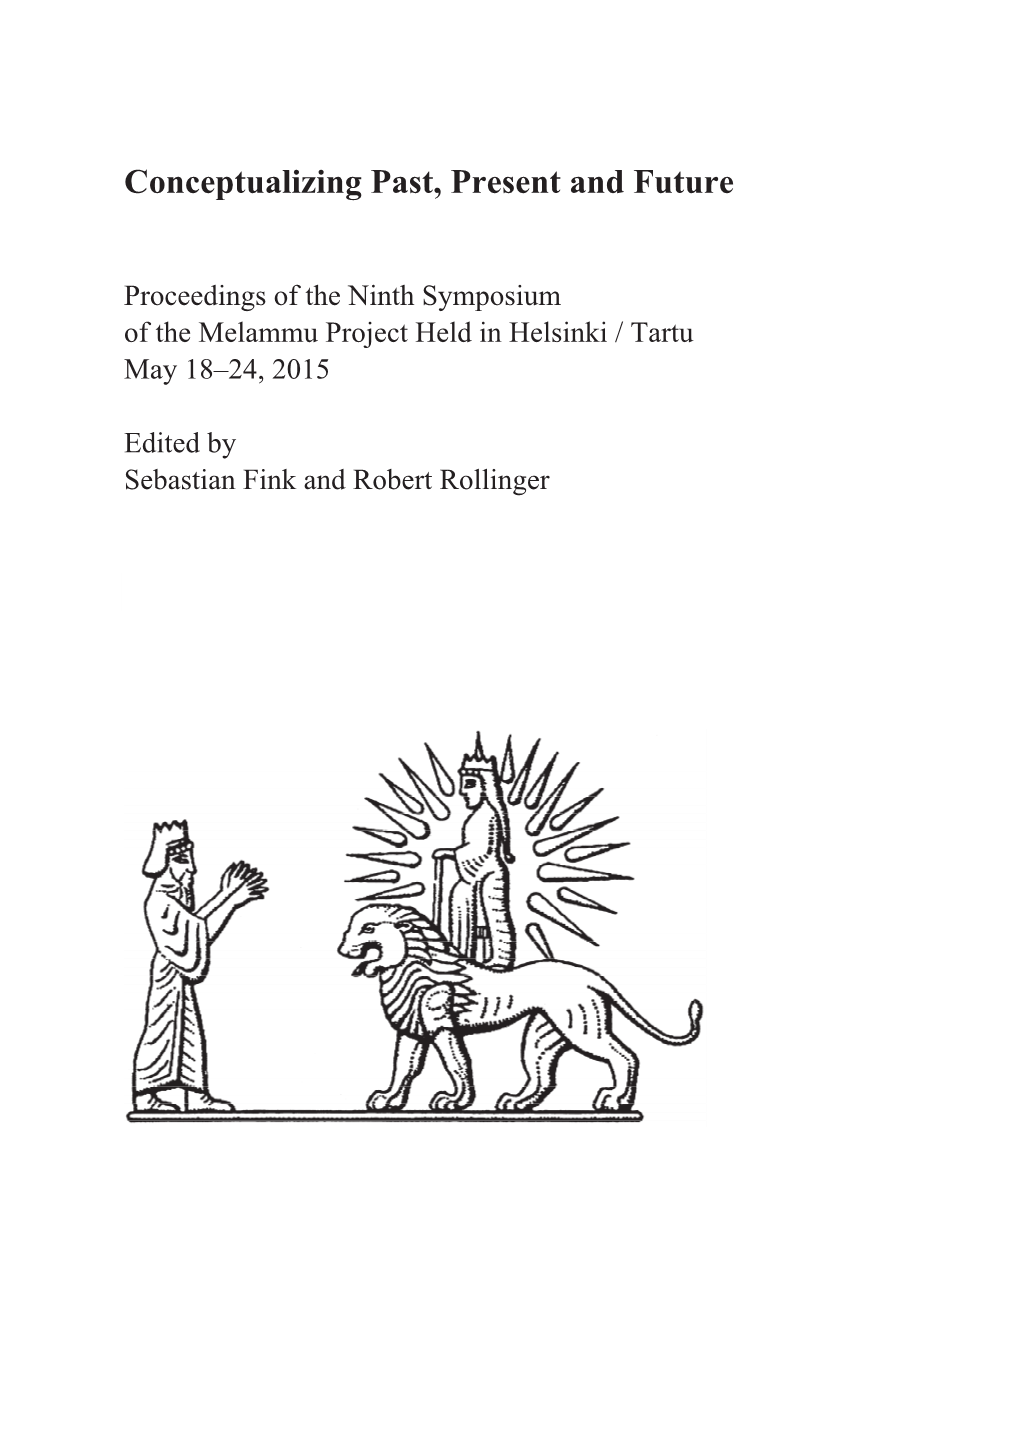 Conceptualizing Past, Present and Future in Ancient Near East and Greece: Response on Young Researchers Workshop 599